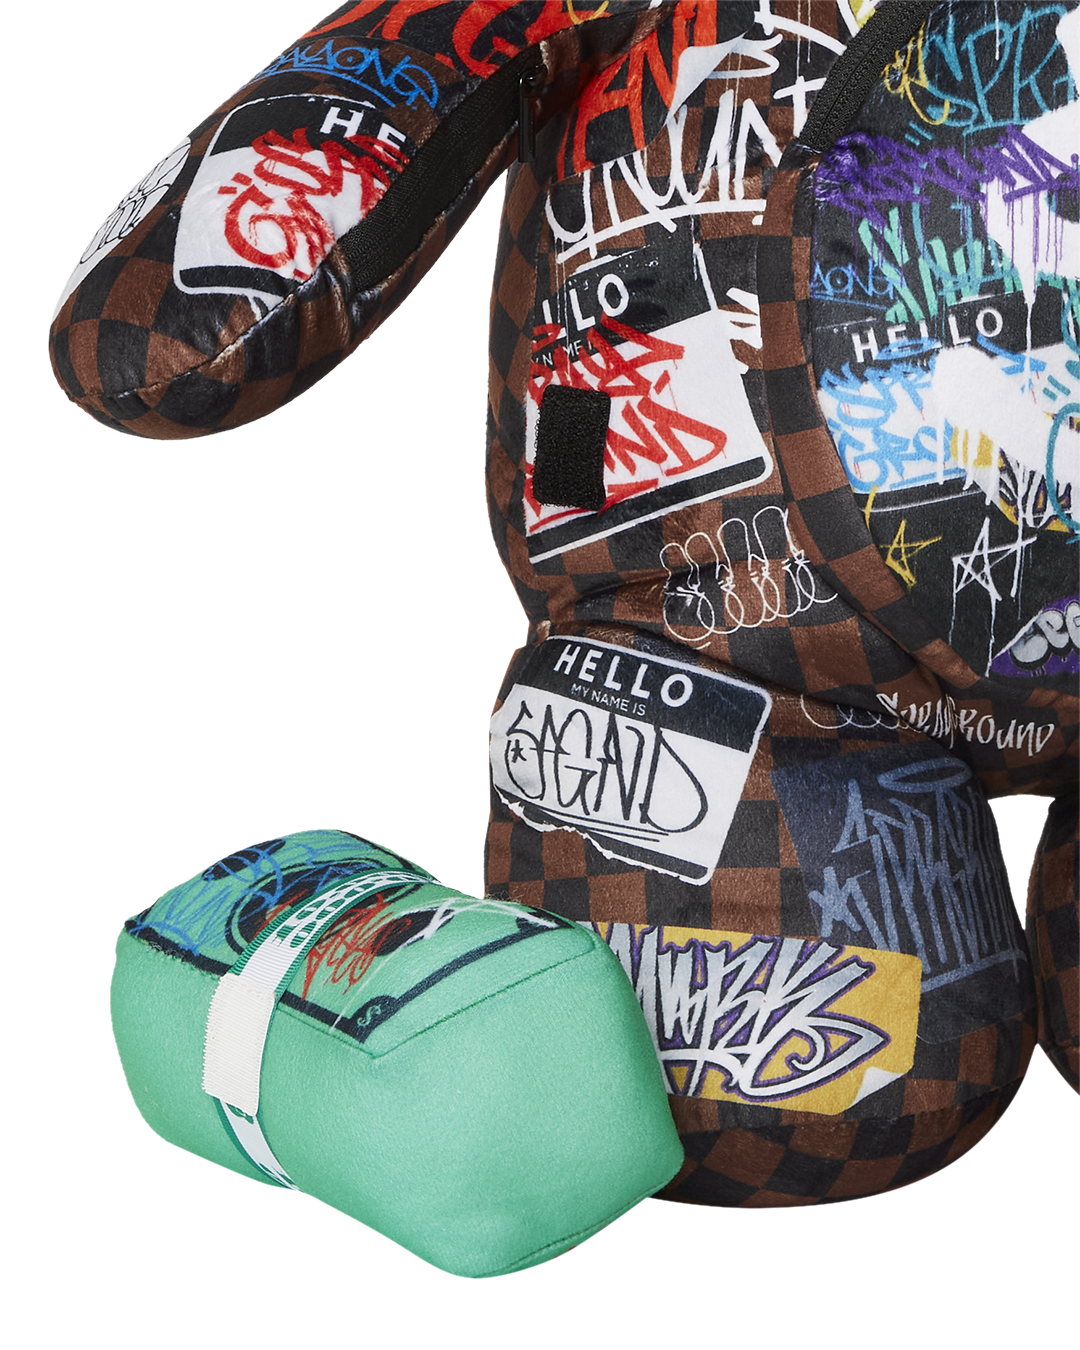 SPRAYGROUND SHARKS IN PARIS THE RIZZ BACKPACK (DLXV) *LIMITED EDITION*  (B5119)